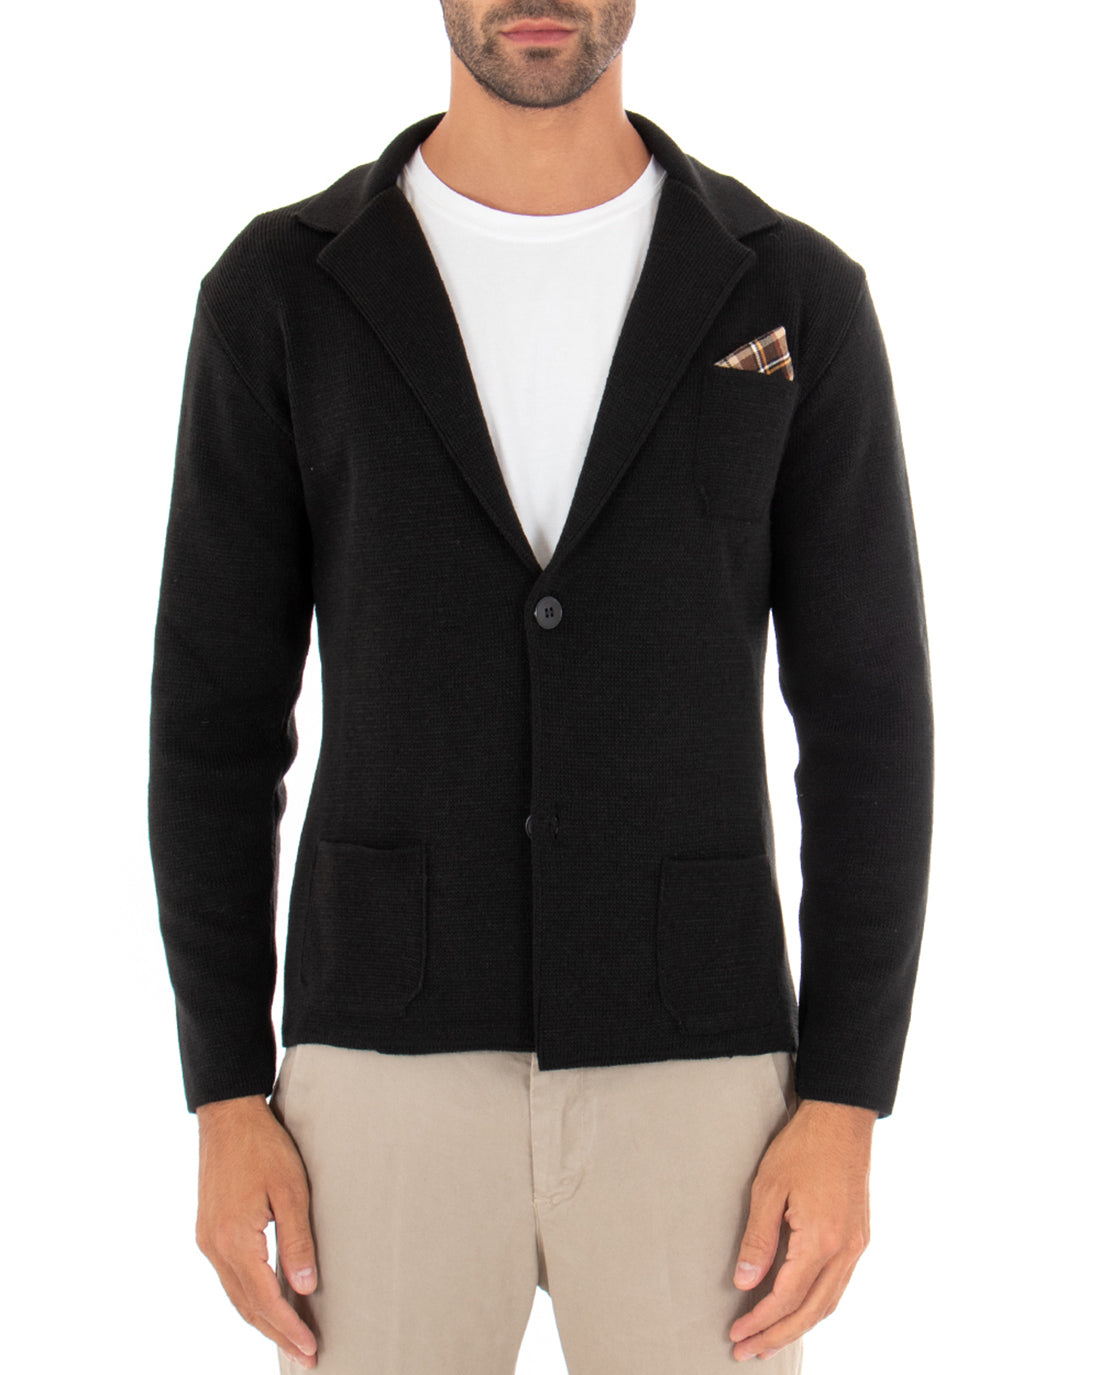 Men's Cardigan Jacket With Buttons Knit Sweater Solid Color Casual Black GIOSAL-M2663A